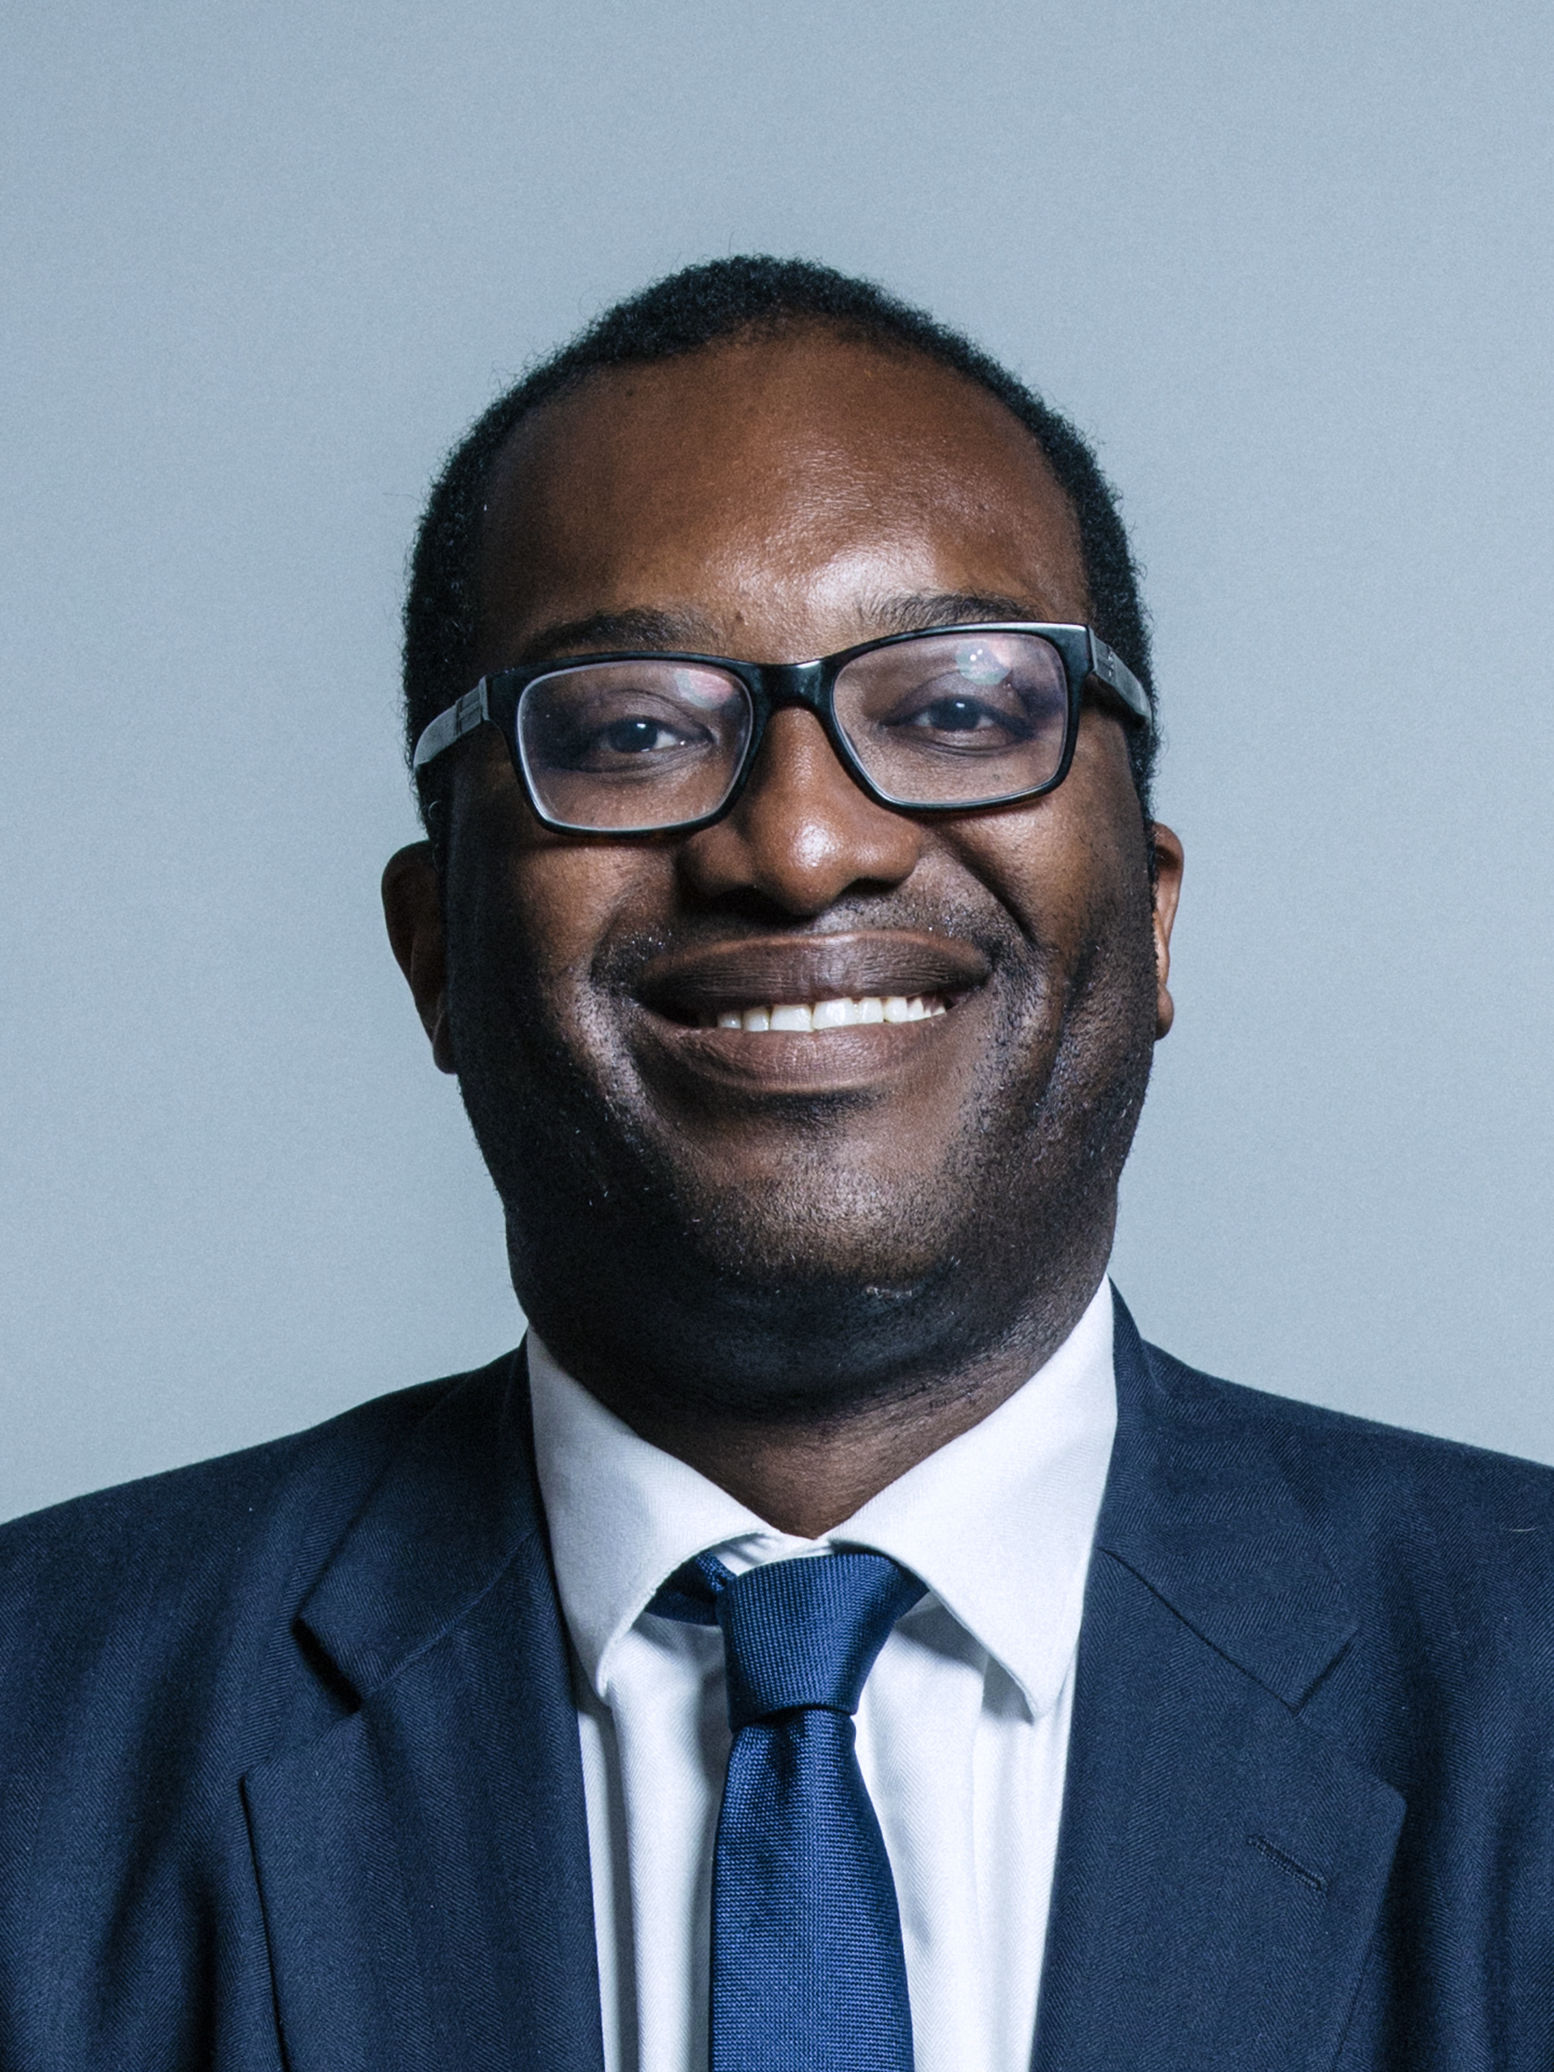 UK's Kwarteng: not focussed on new austerity measures 